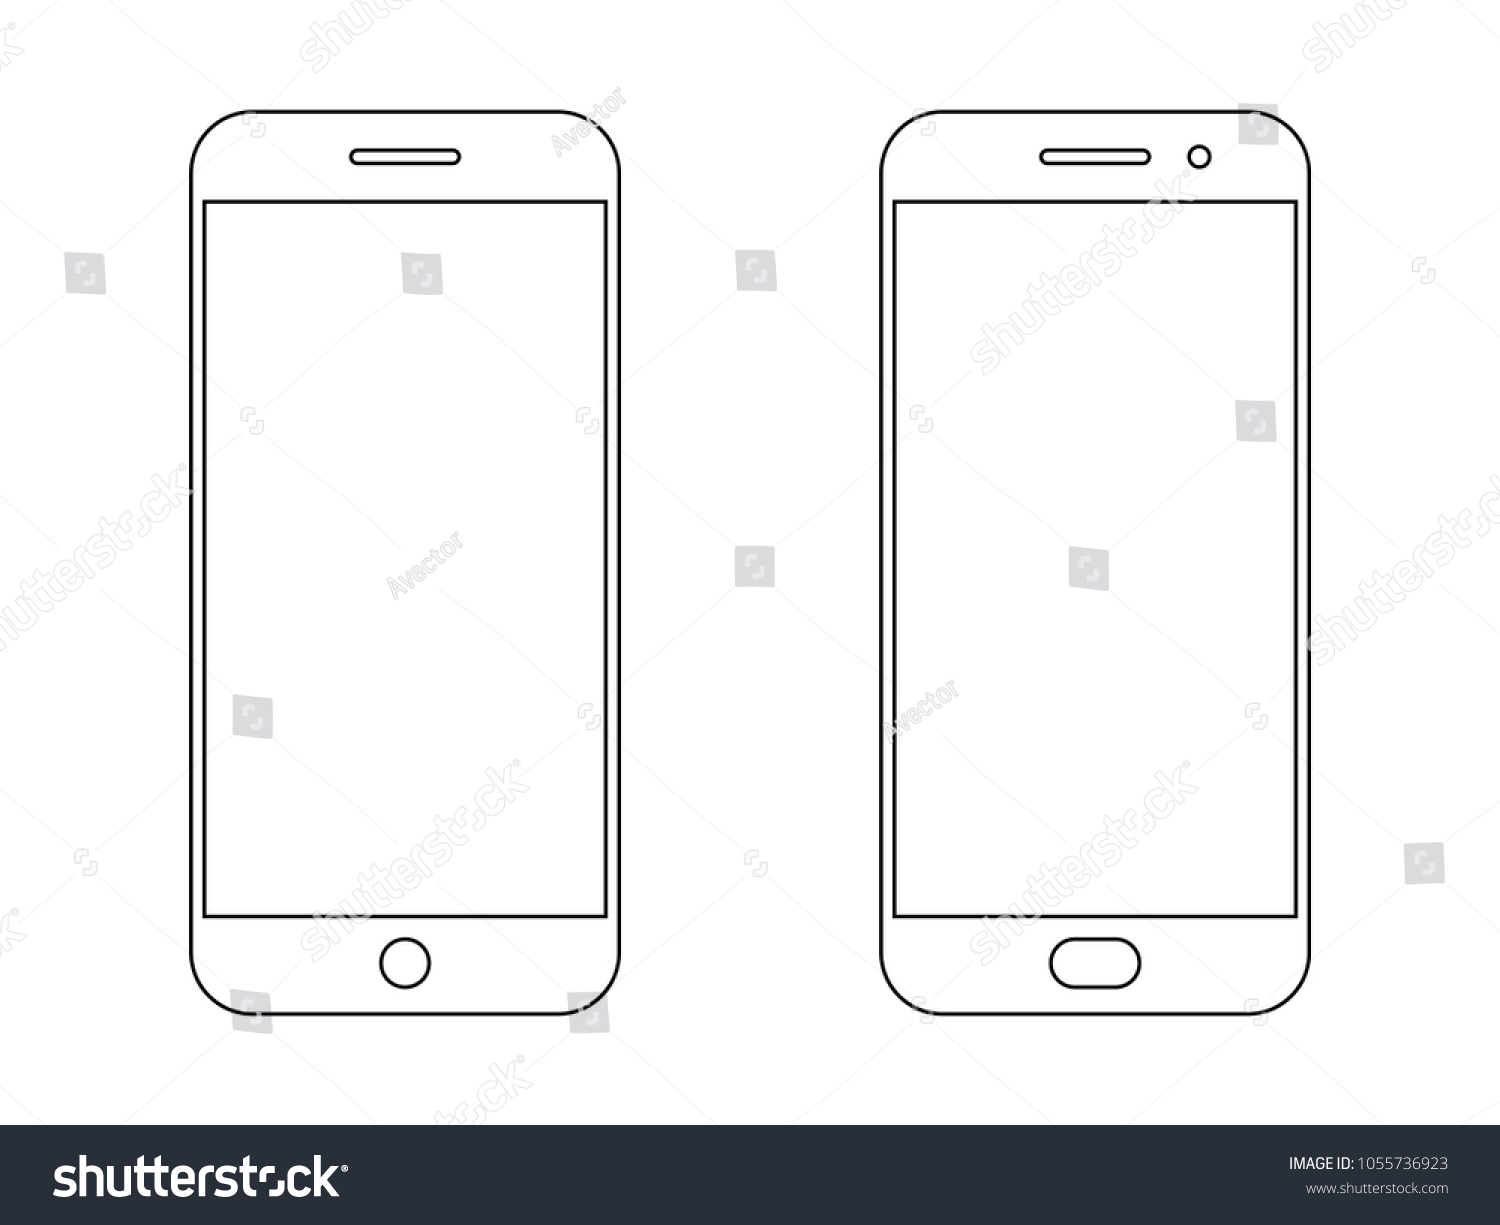 Smartphone outline vector icon of mobile smart phone screen or modern android cellphone #1055736923